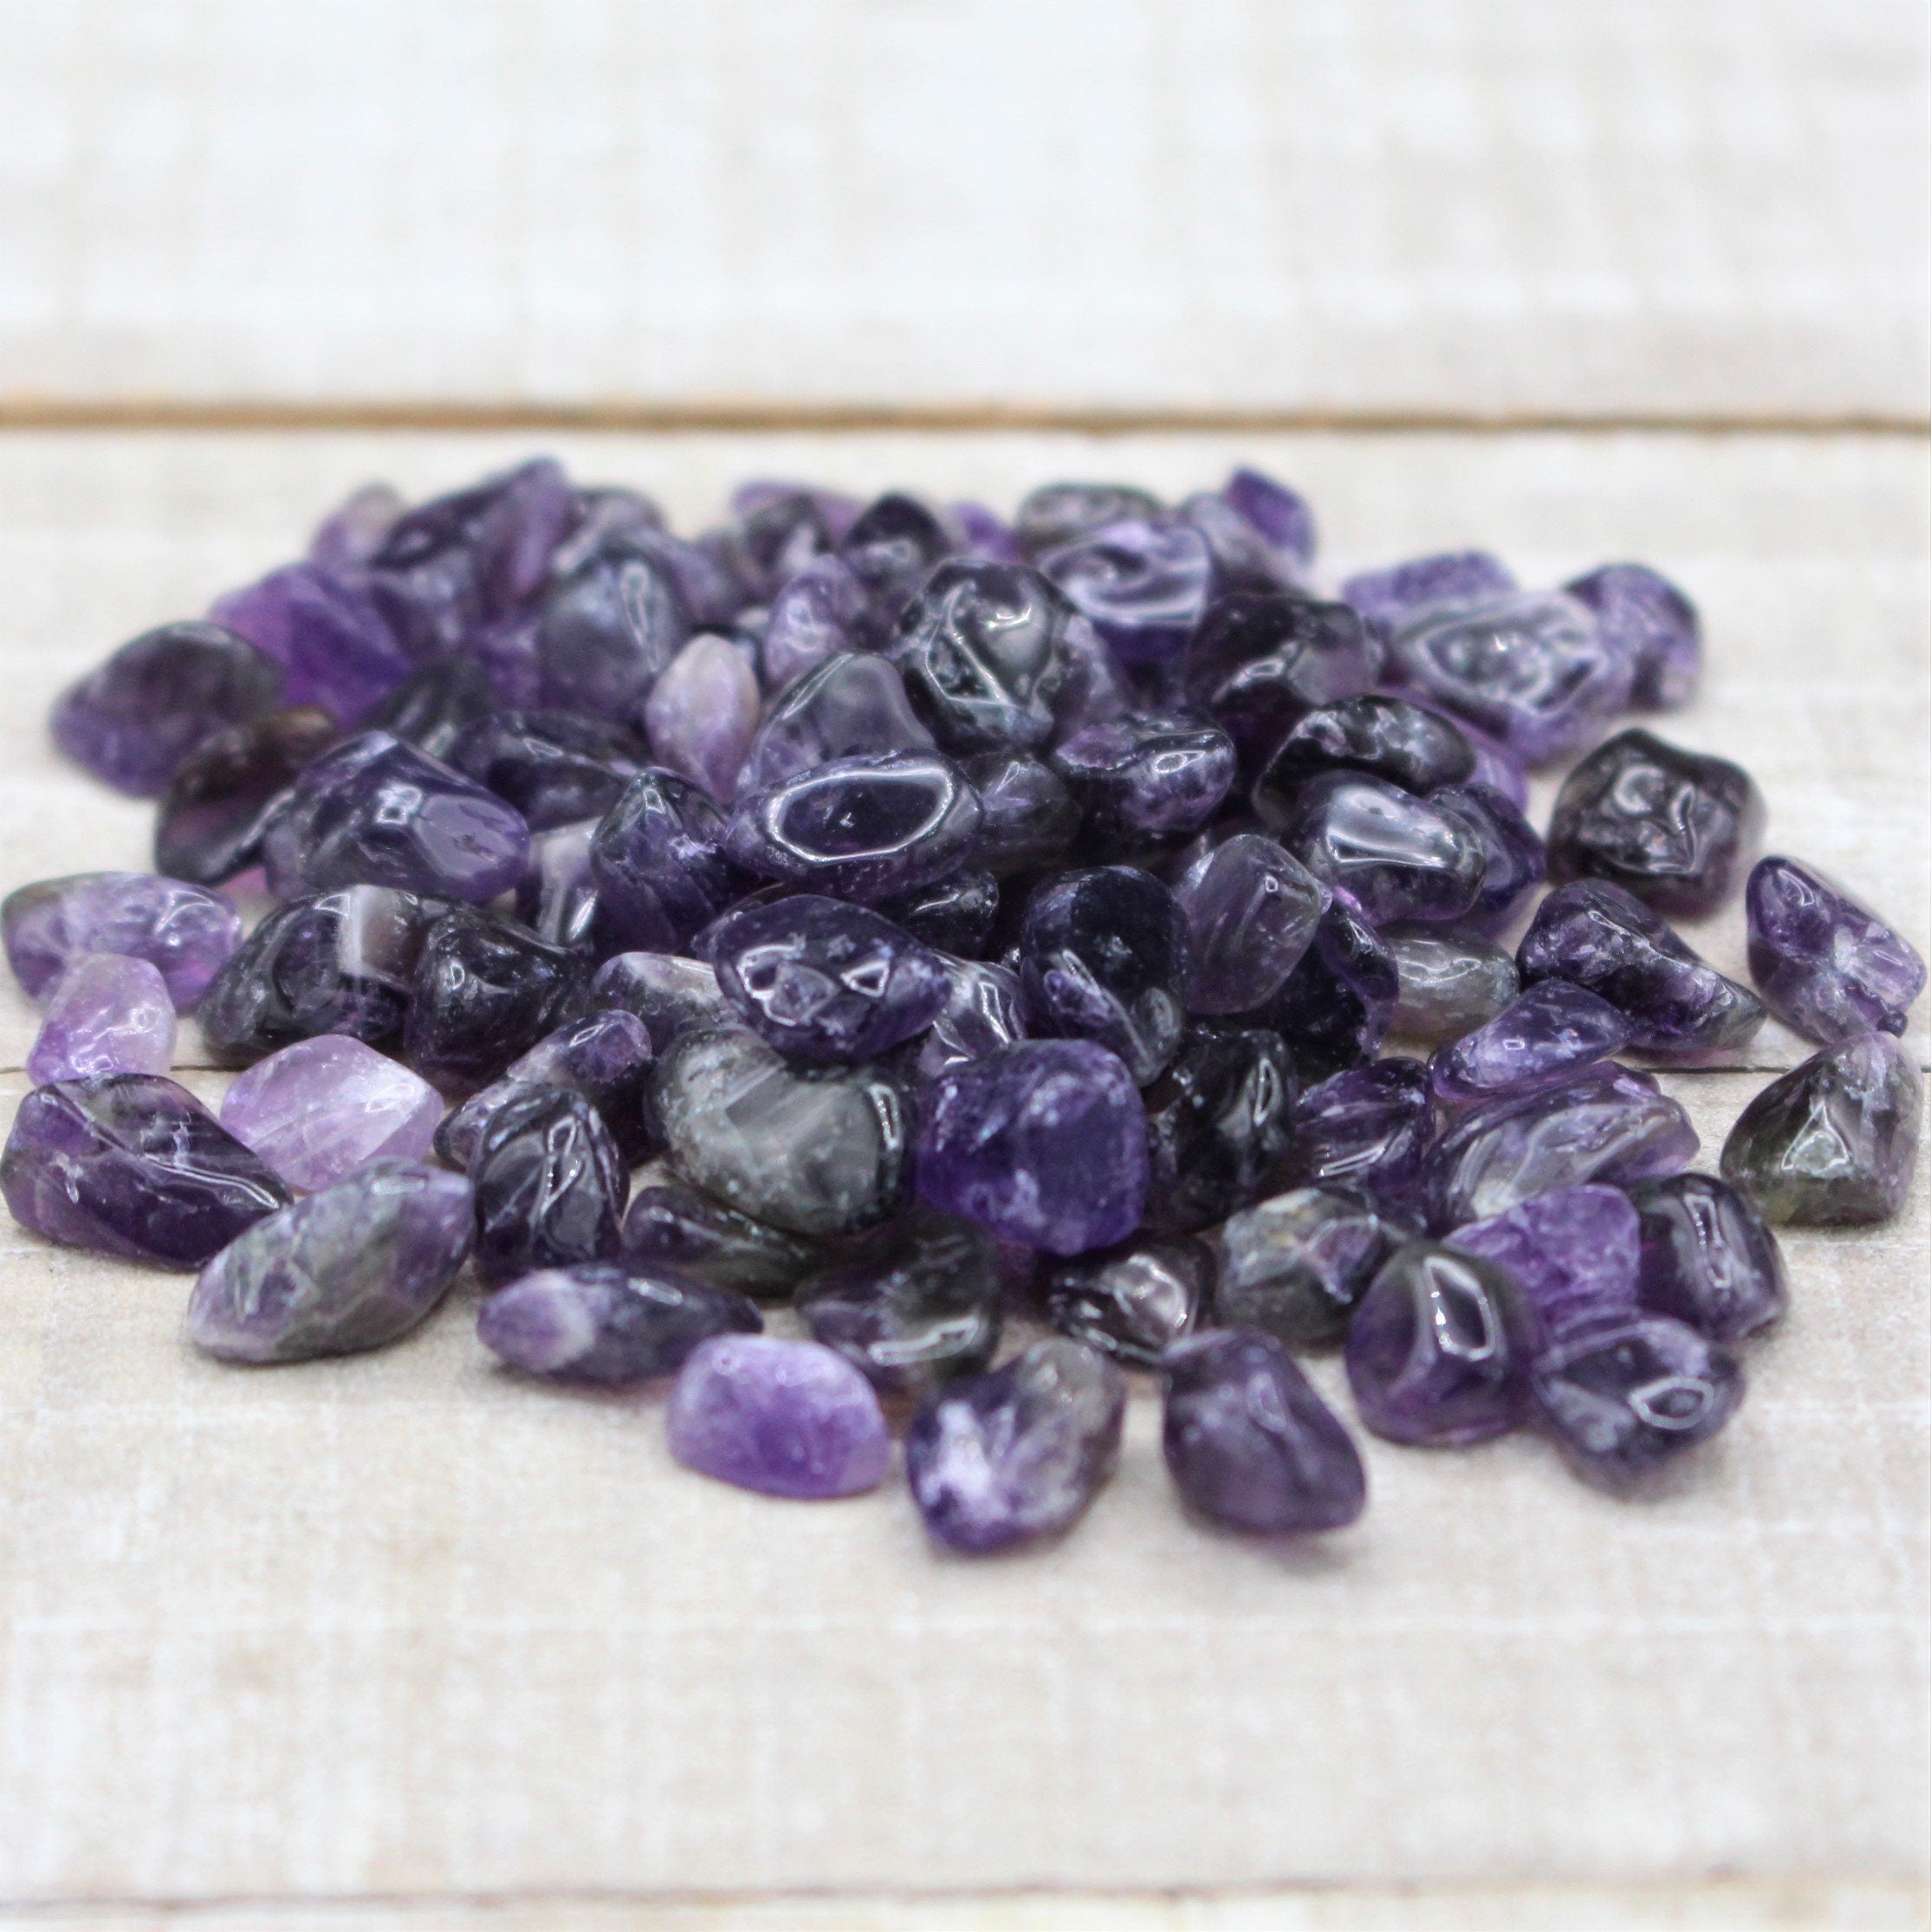 Amethyst Tumbled Crystal Chips